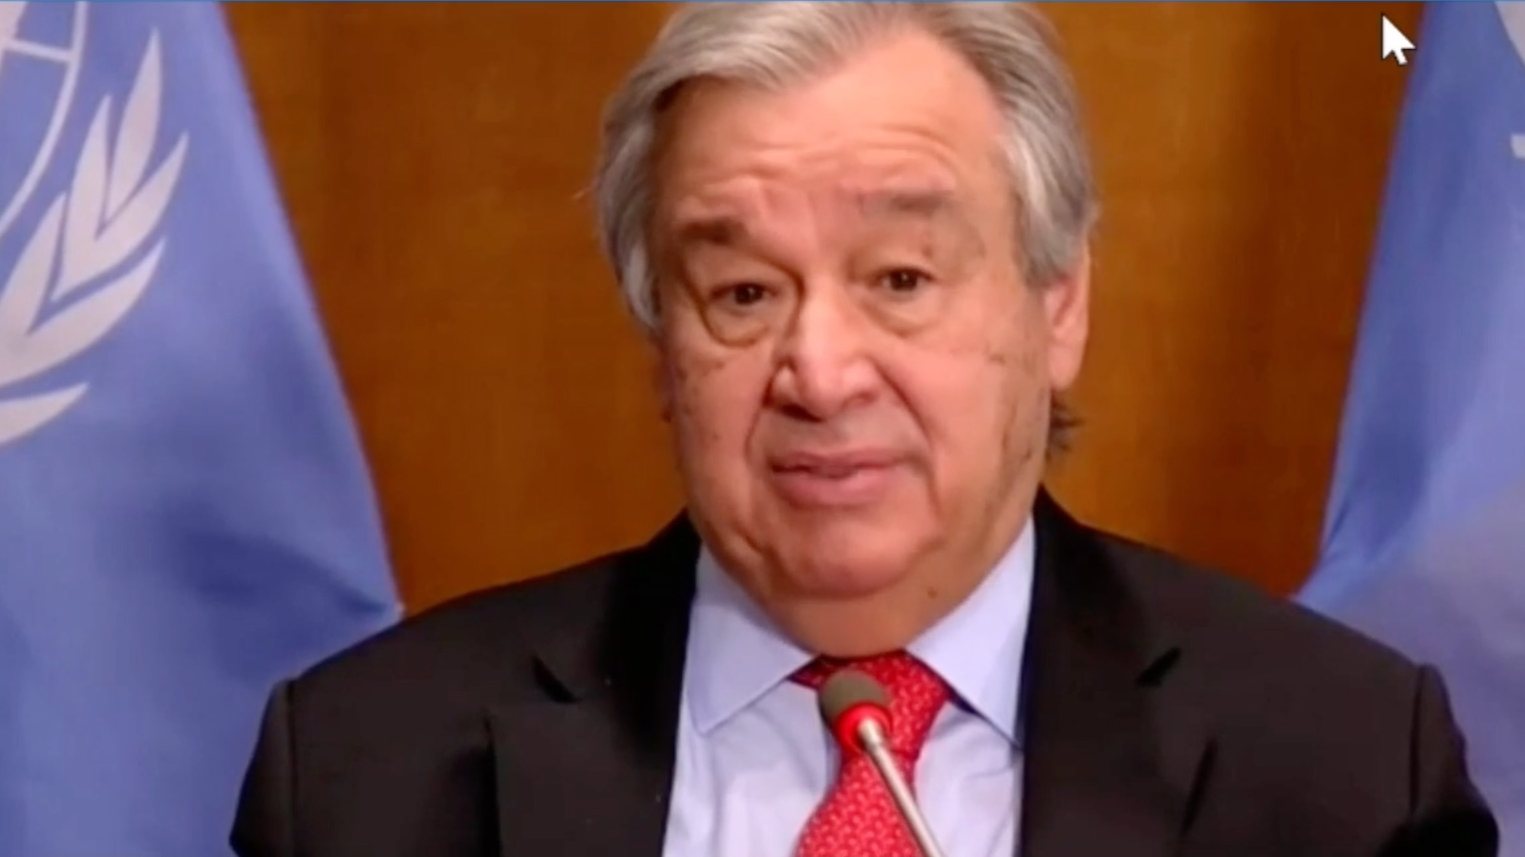 epa08964974 A still image obtained from a live video feed by the World Economic Forum (WEF) shows Secretary-General of the United Nations Antonio Guterres as he delivers Special Address during a virtual meeting of the World Economic Forum, 25 January 2021. The World Economic Forum (WEF) was scheduled to take place in Davos. Due to the Coronavirus outbreak, it will be held online in a digital format from January, 25-29.  EPA/PASCAL BITZ / WEF HANDOUT MANDATORY CREDIT / HANDOUT EDITORIAL USE ONLY/NO SALES